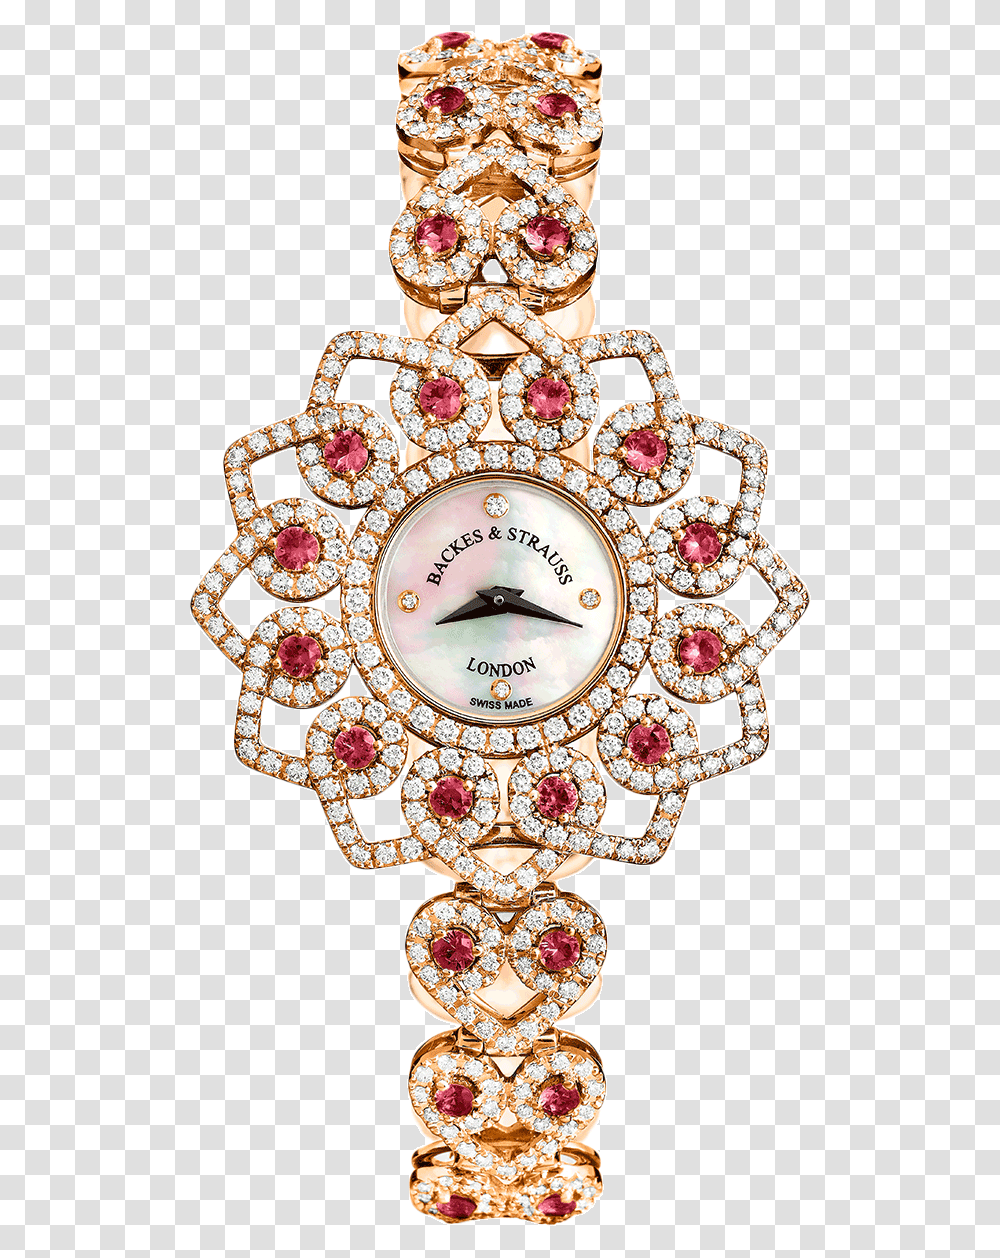 Victoria Princess Red Rose Luxury Diamond Watch Analog Watch, Wall Clock, Brooch, Jewelry, Accessories Transparent Png